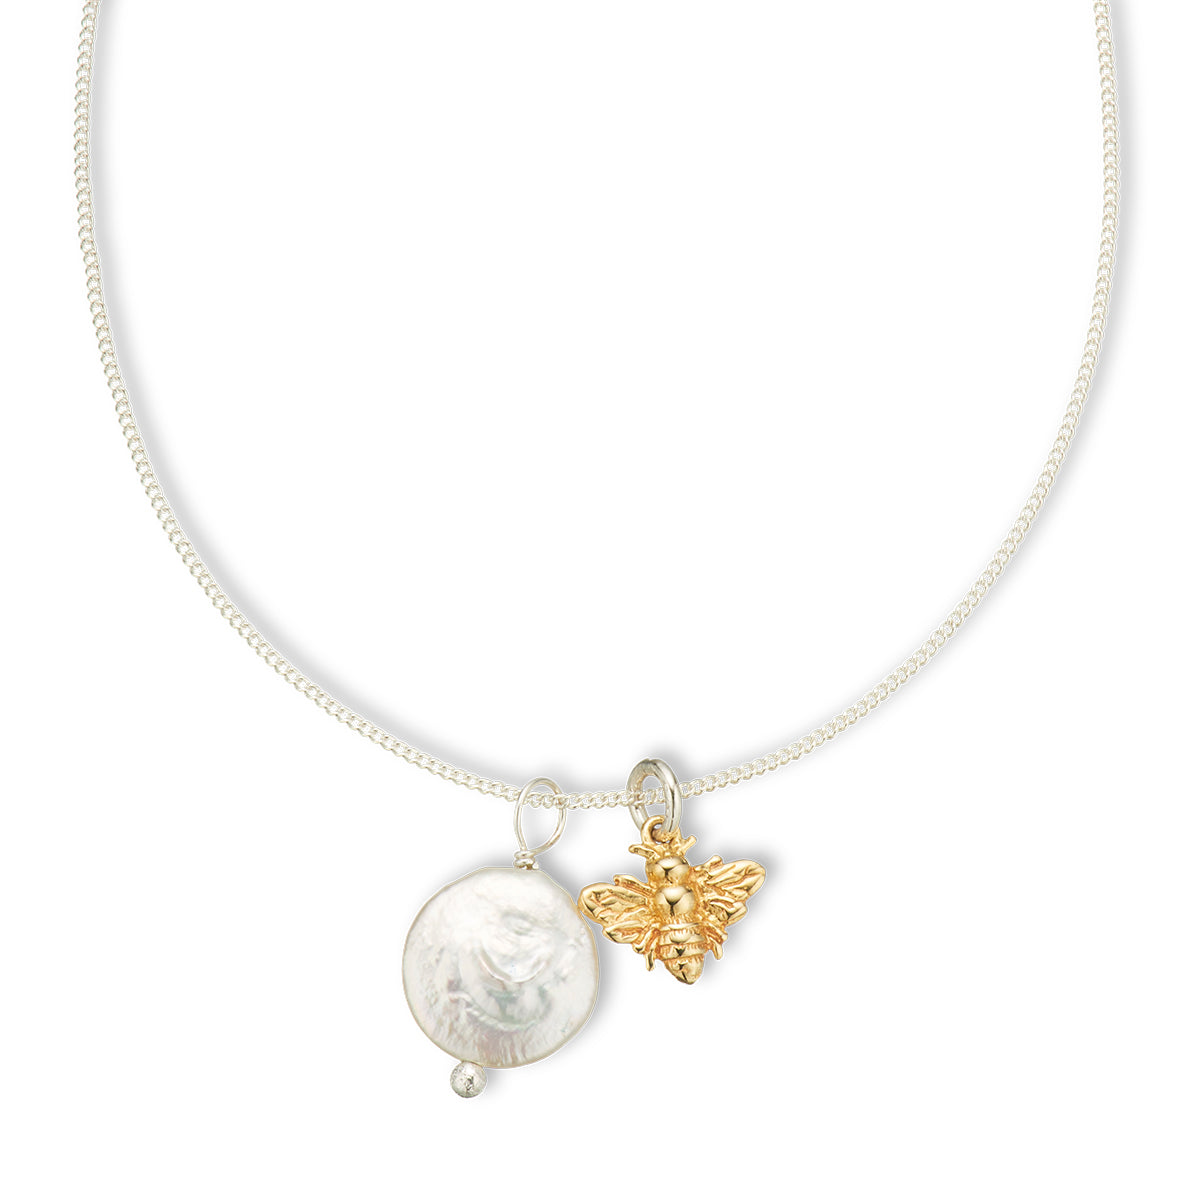 Golden bee and pearl amulet necklace